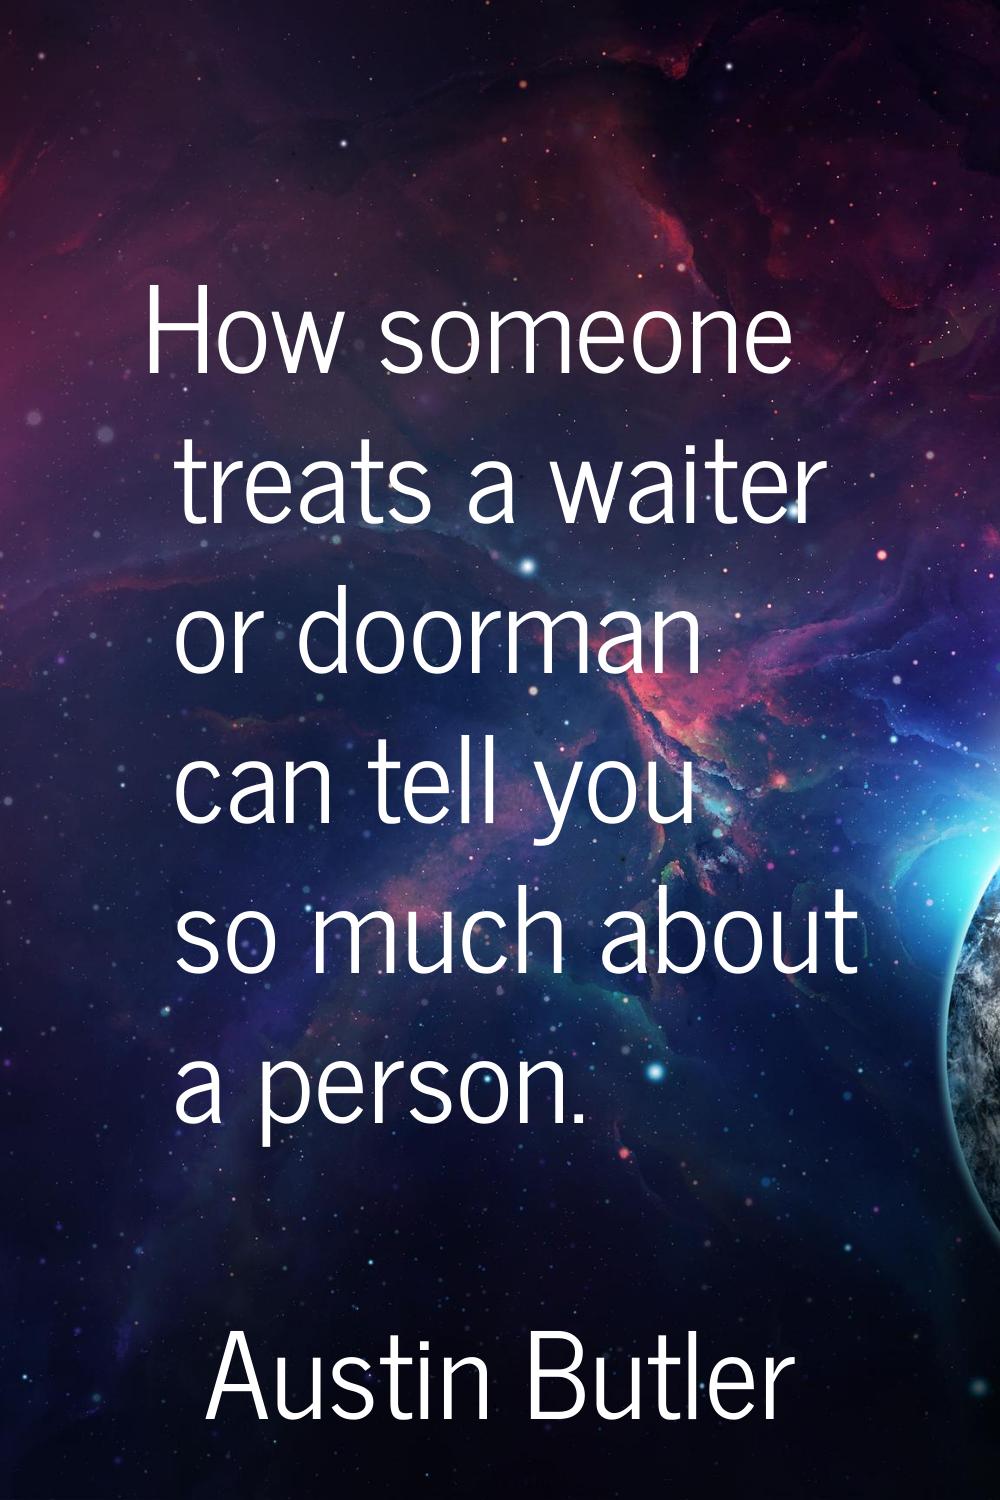 How someone treats a waiter or doorman can tell you so much about a person.